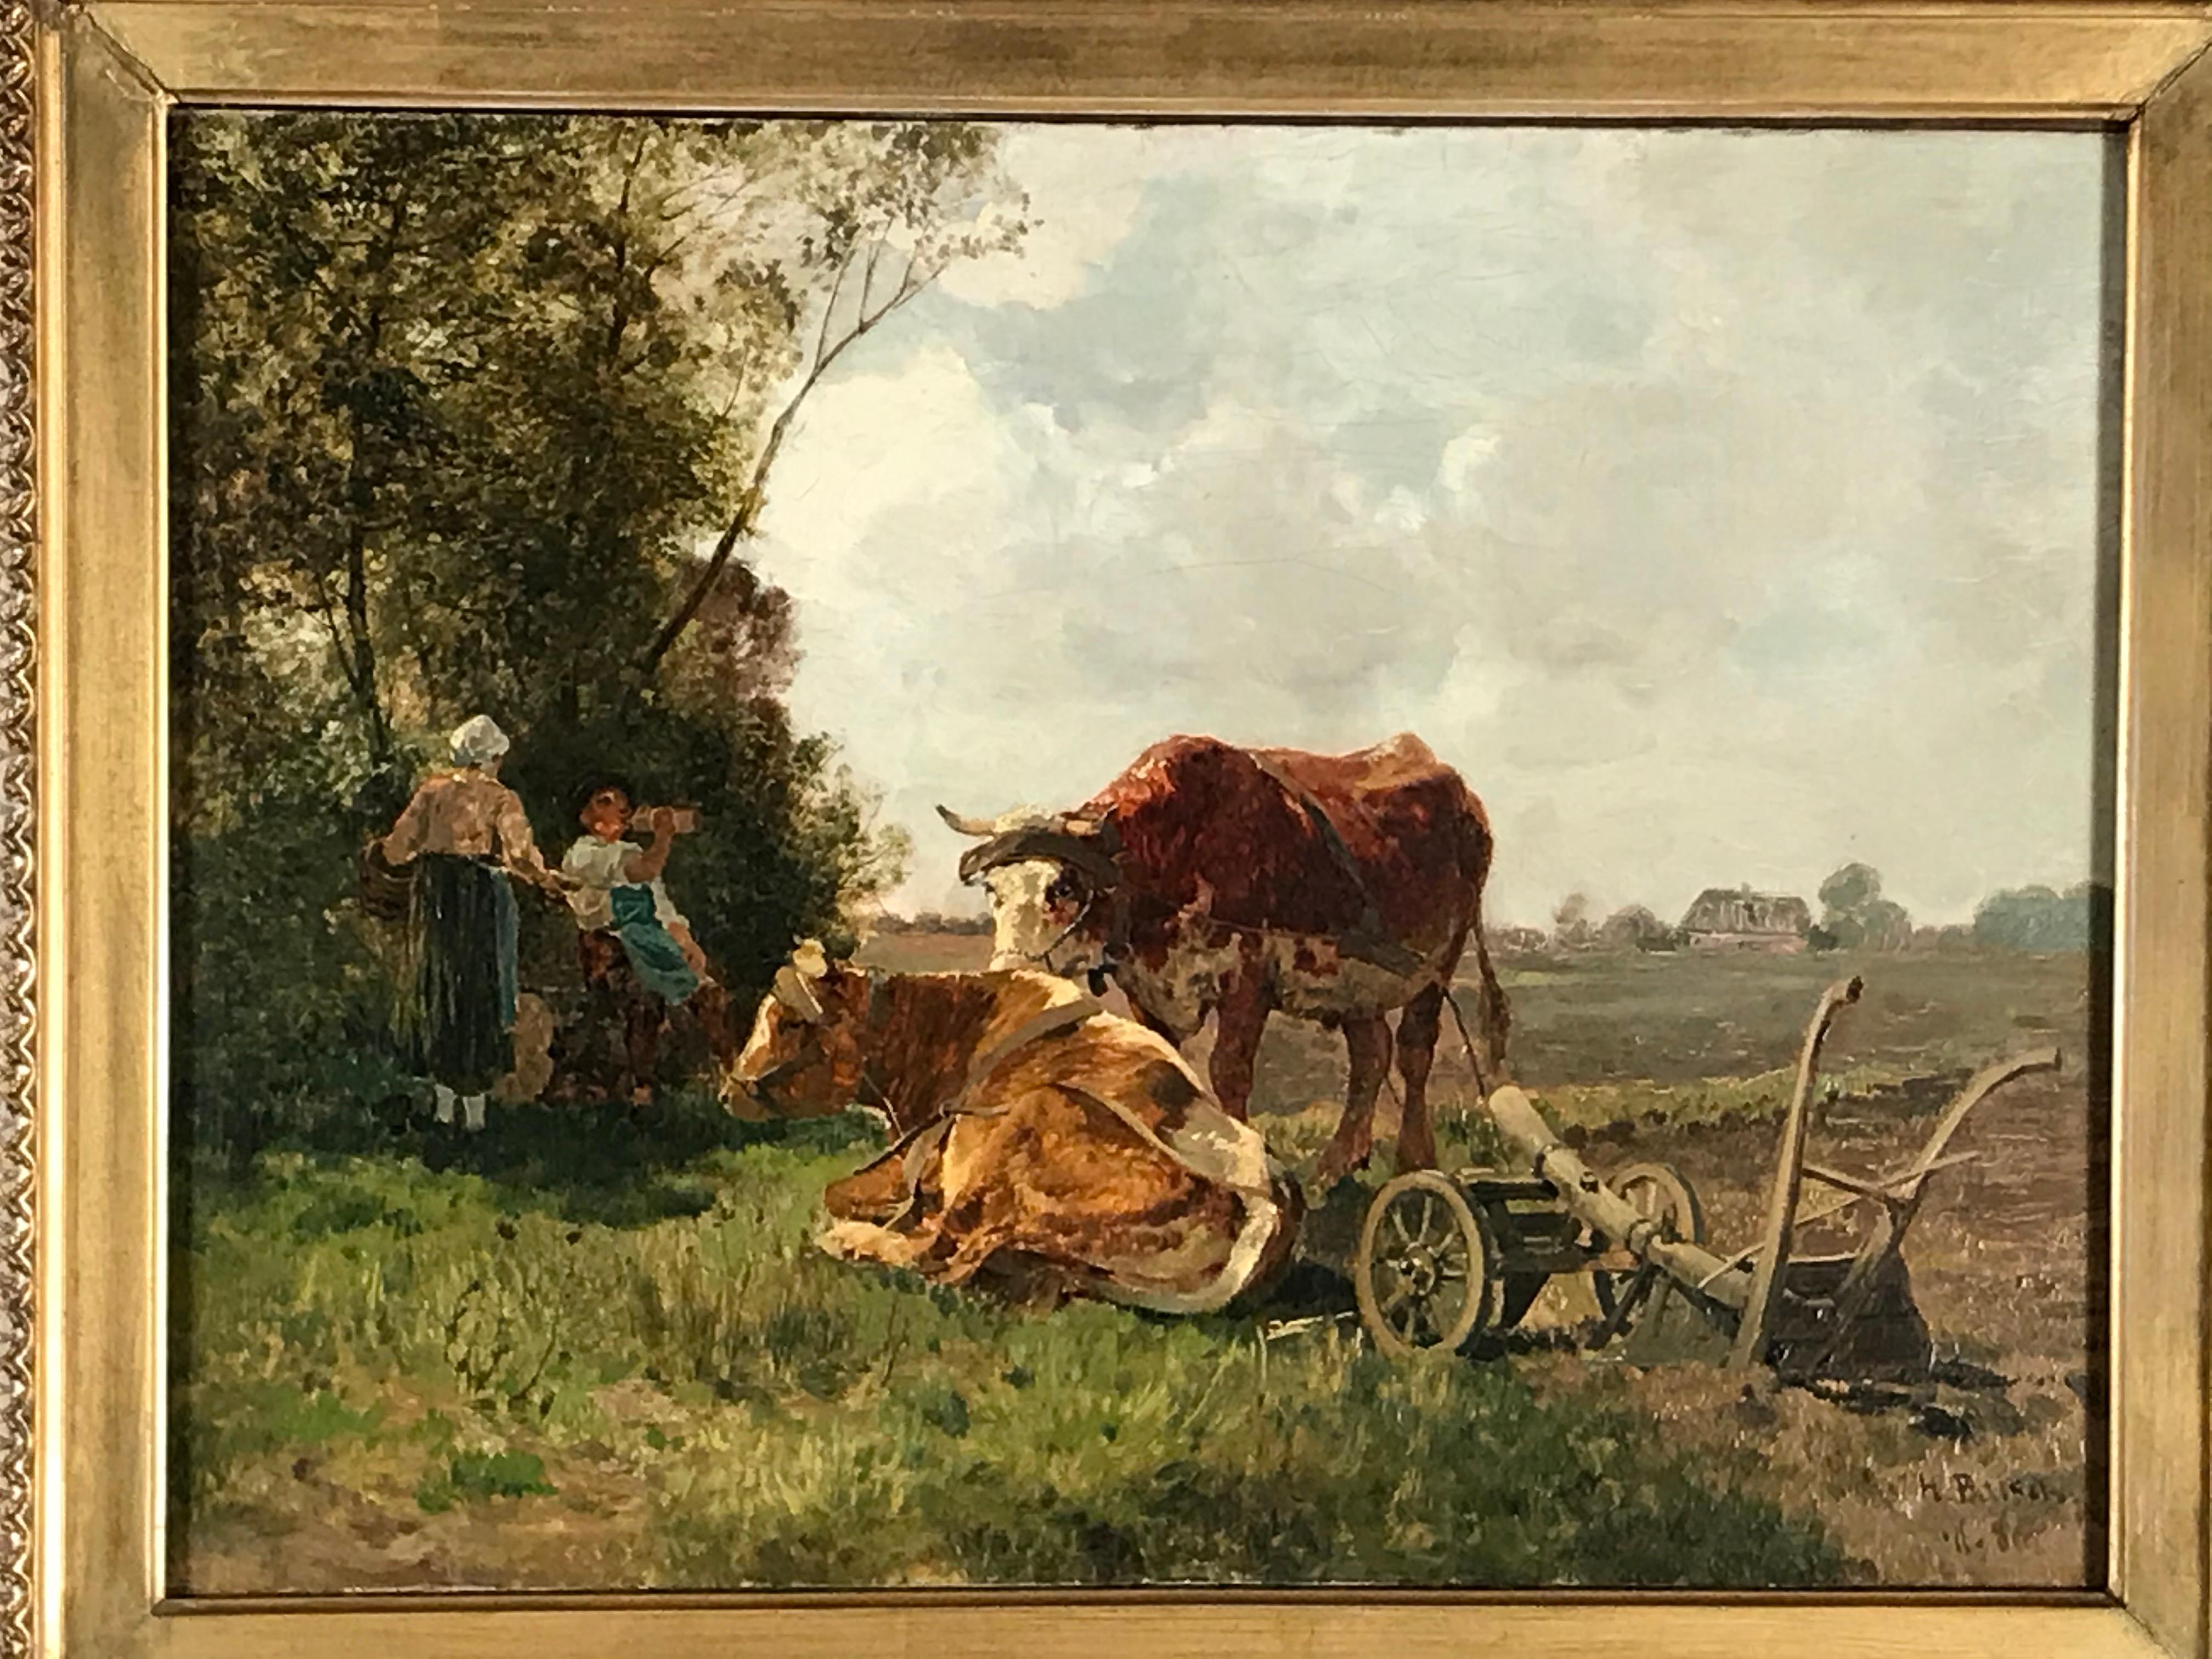 Painting by Hermann Baisch (Dresden 1846-Karlsruhe 1894), “Farmers taking a Rest”, oil on canvas

Hermann Baisch was a German painter and illustrator who specialized in landscapes and animals. He was one of the first artists in Germany to work in